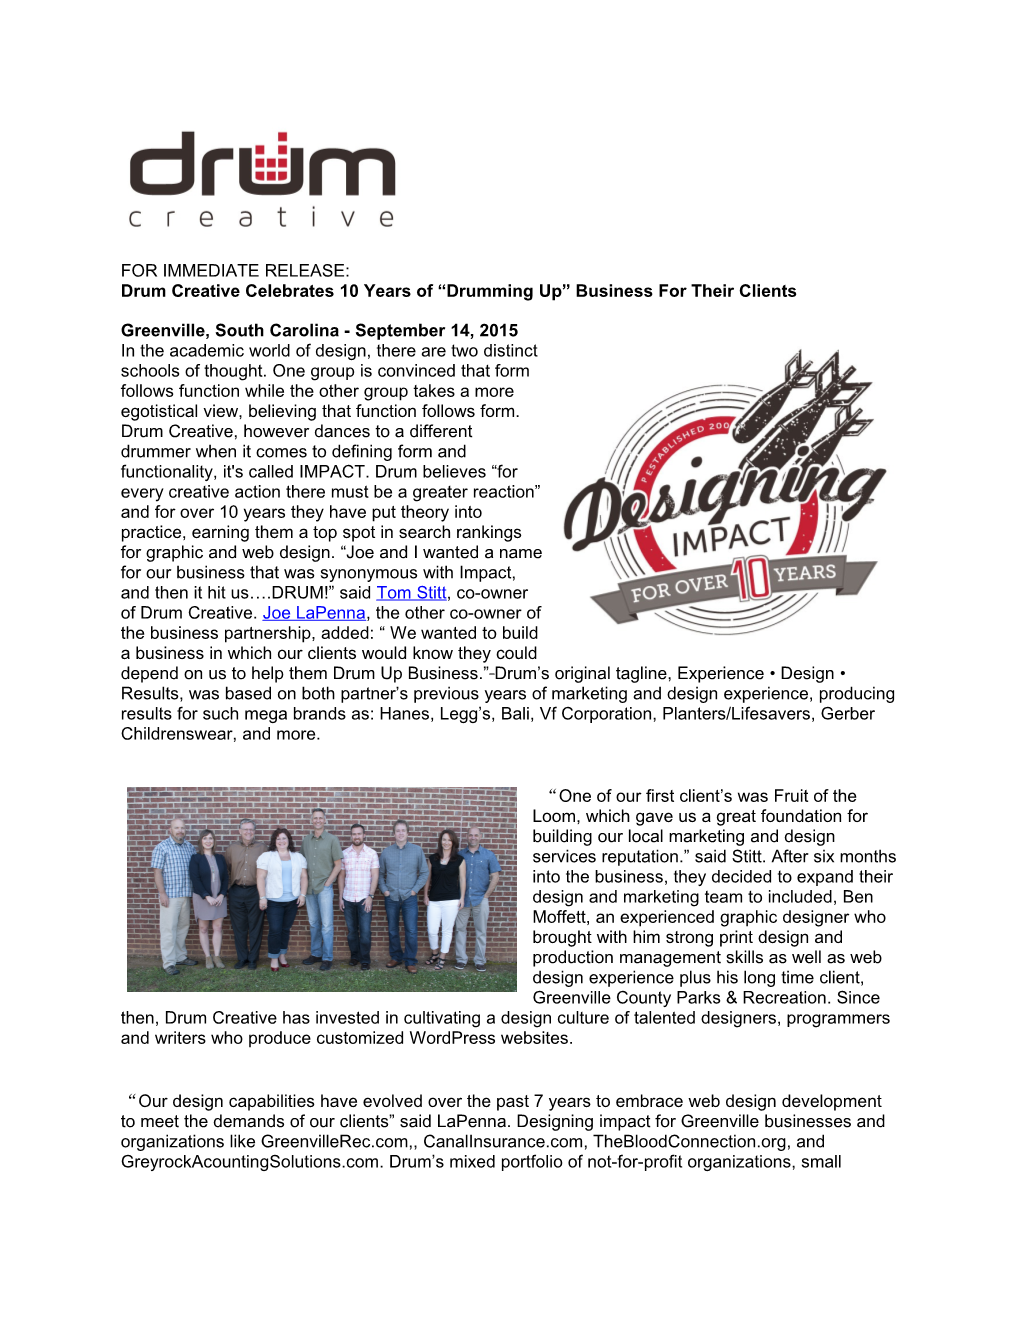 Drum Creative Celebrates 10 Years of Drumming up Business for Their Clients